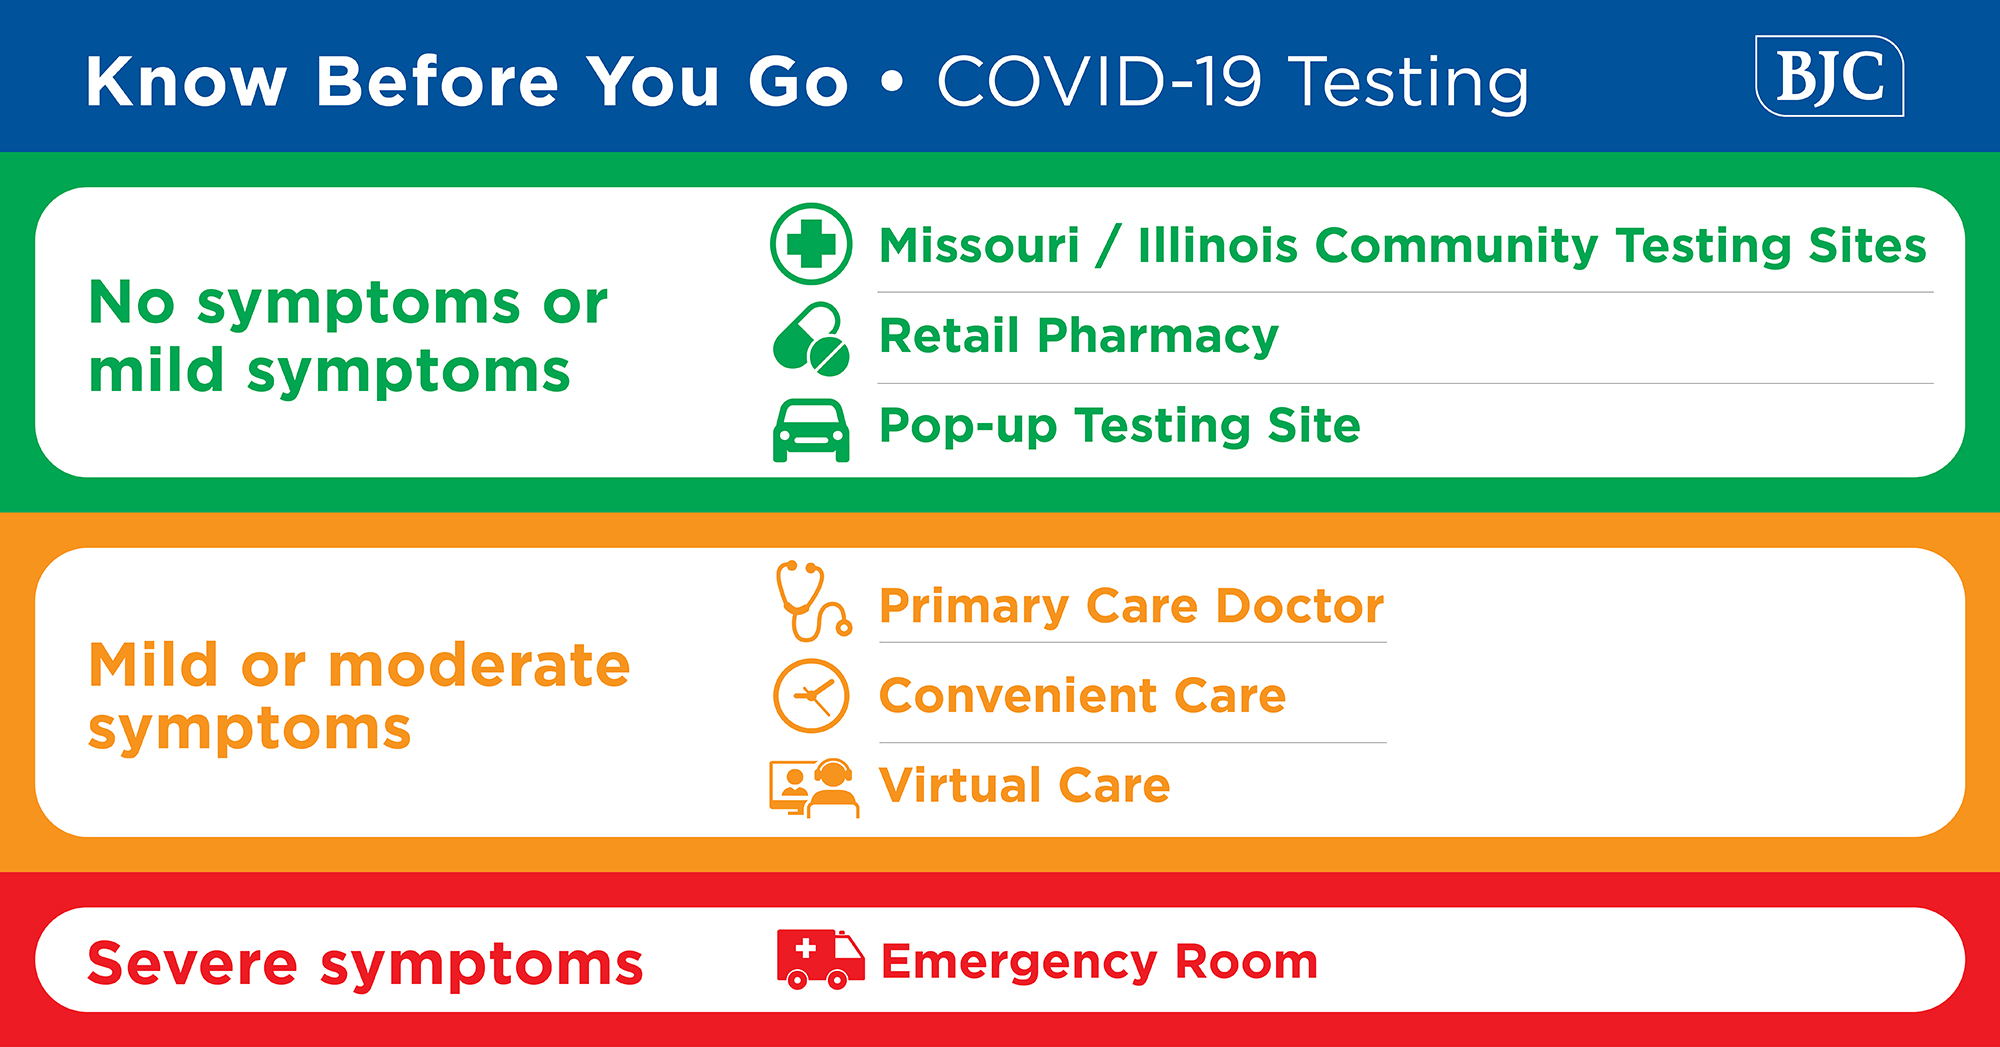 Know Before You Go - COVID-19 Testing Graphic